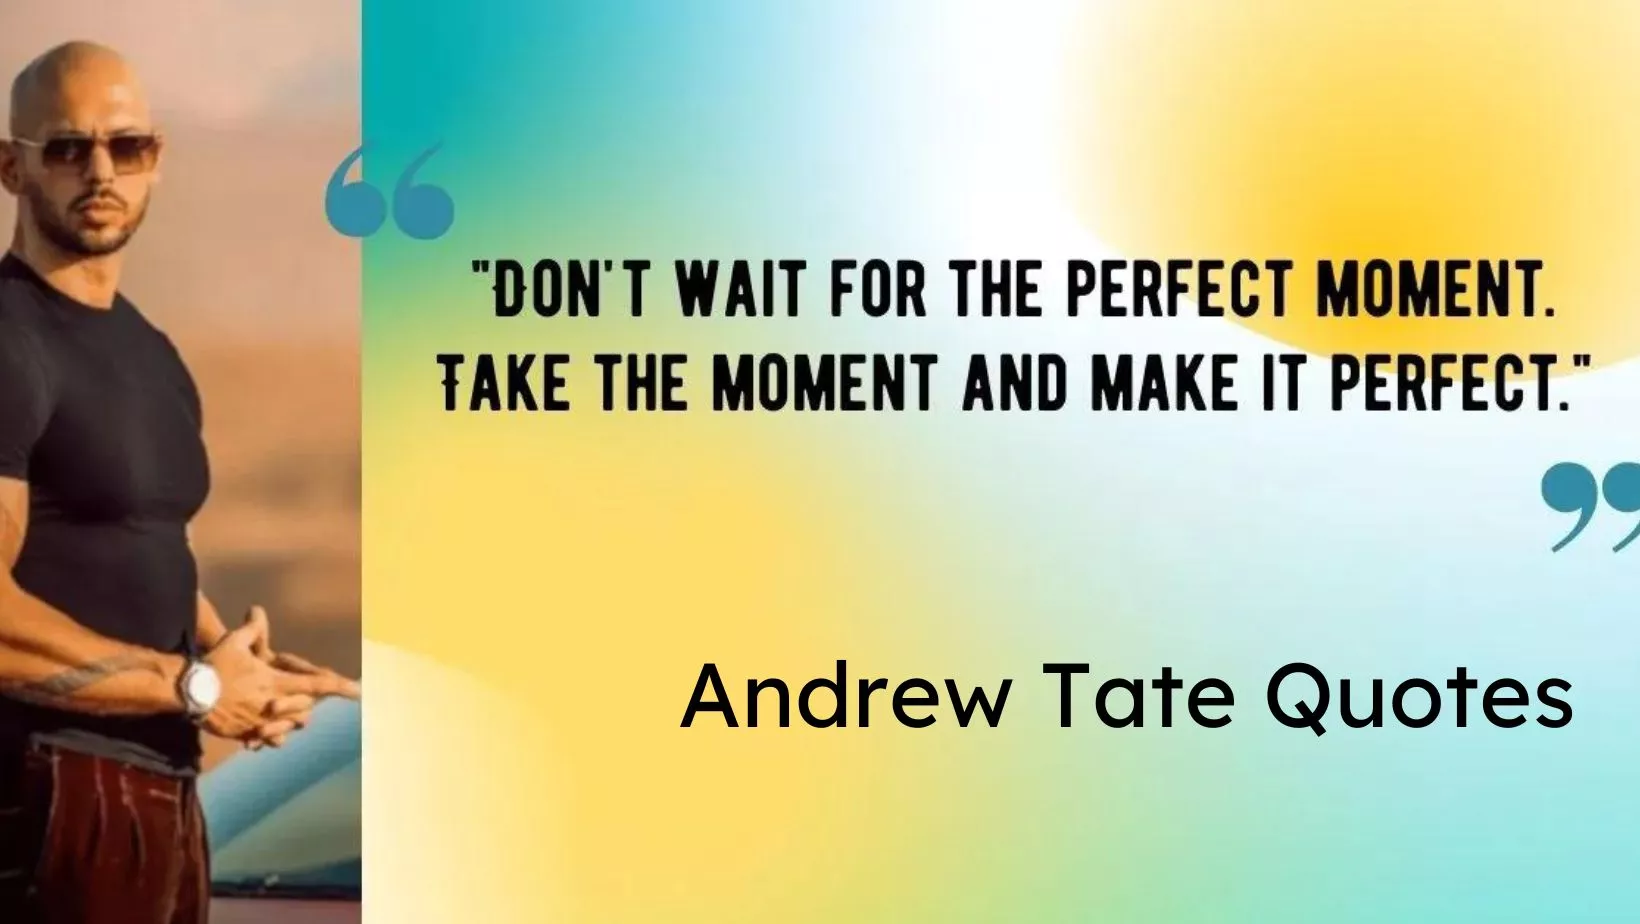 Andrew Tate quotes on love, Life and success., by Balogun Ebunoluwa